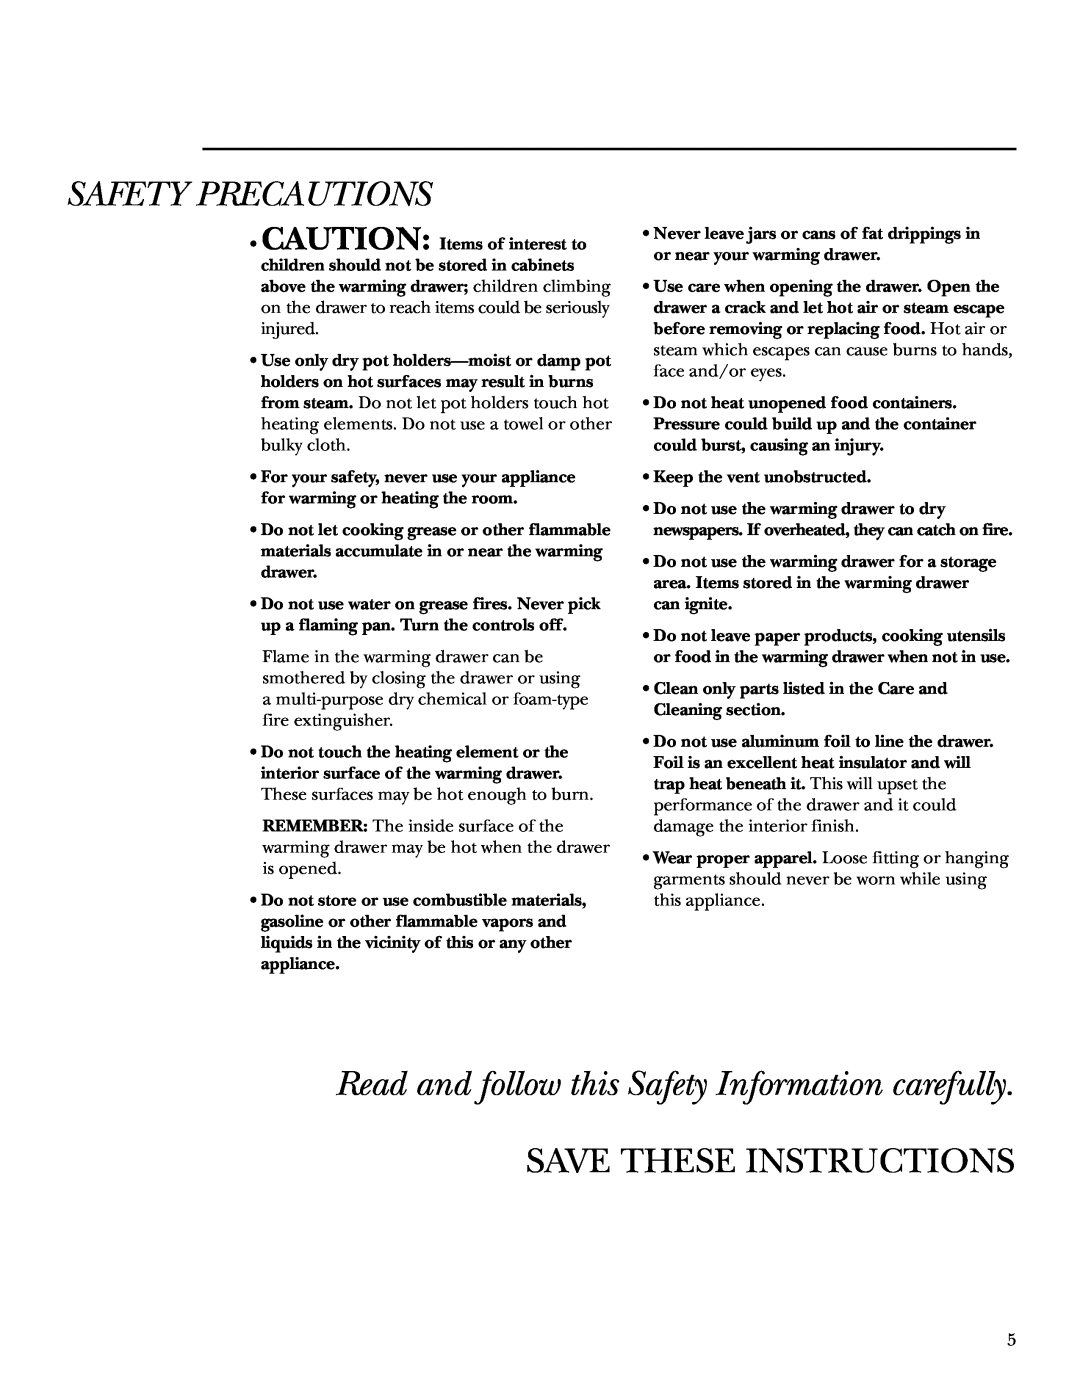 GE ZTD910 owner manual Read and follow this Safety Information carefully, Save These Instructions, Safety Precautions 